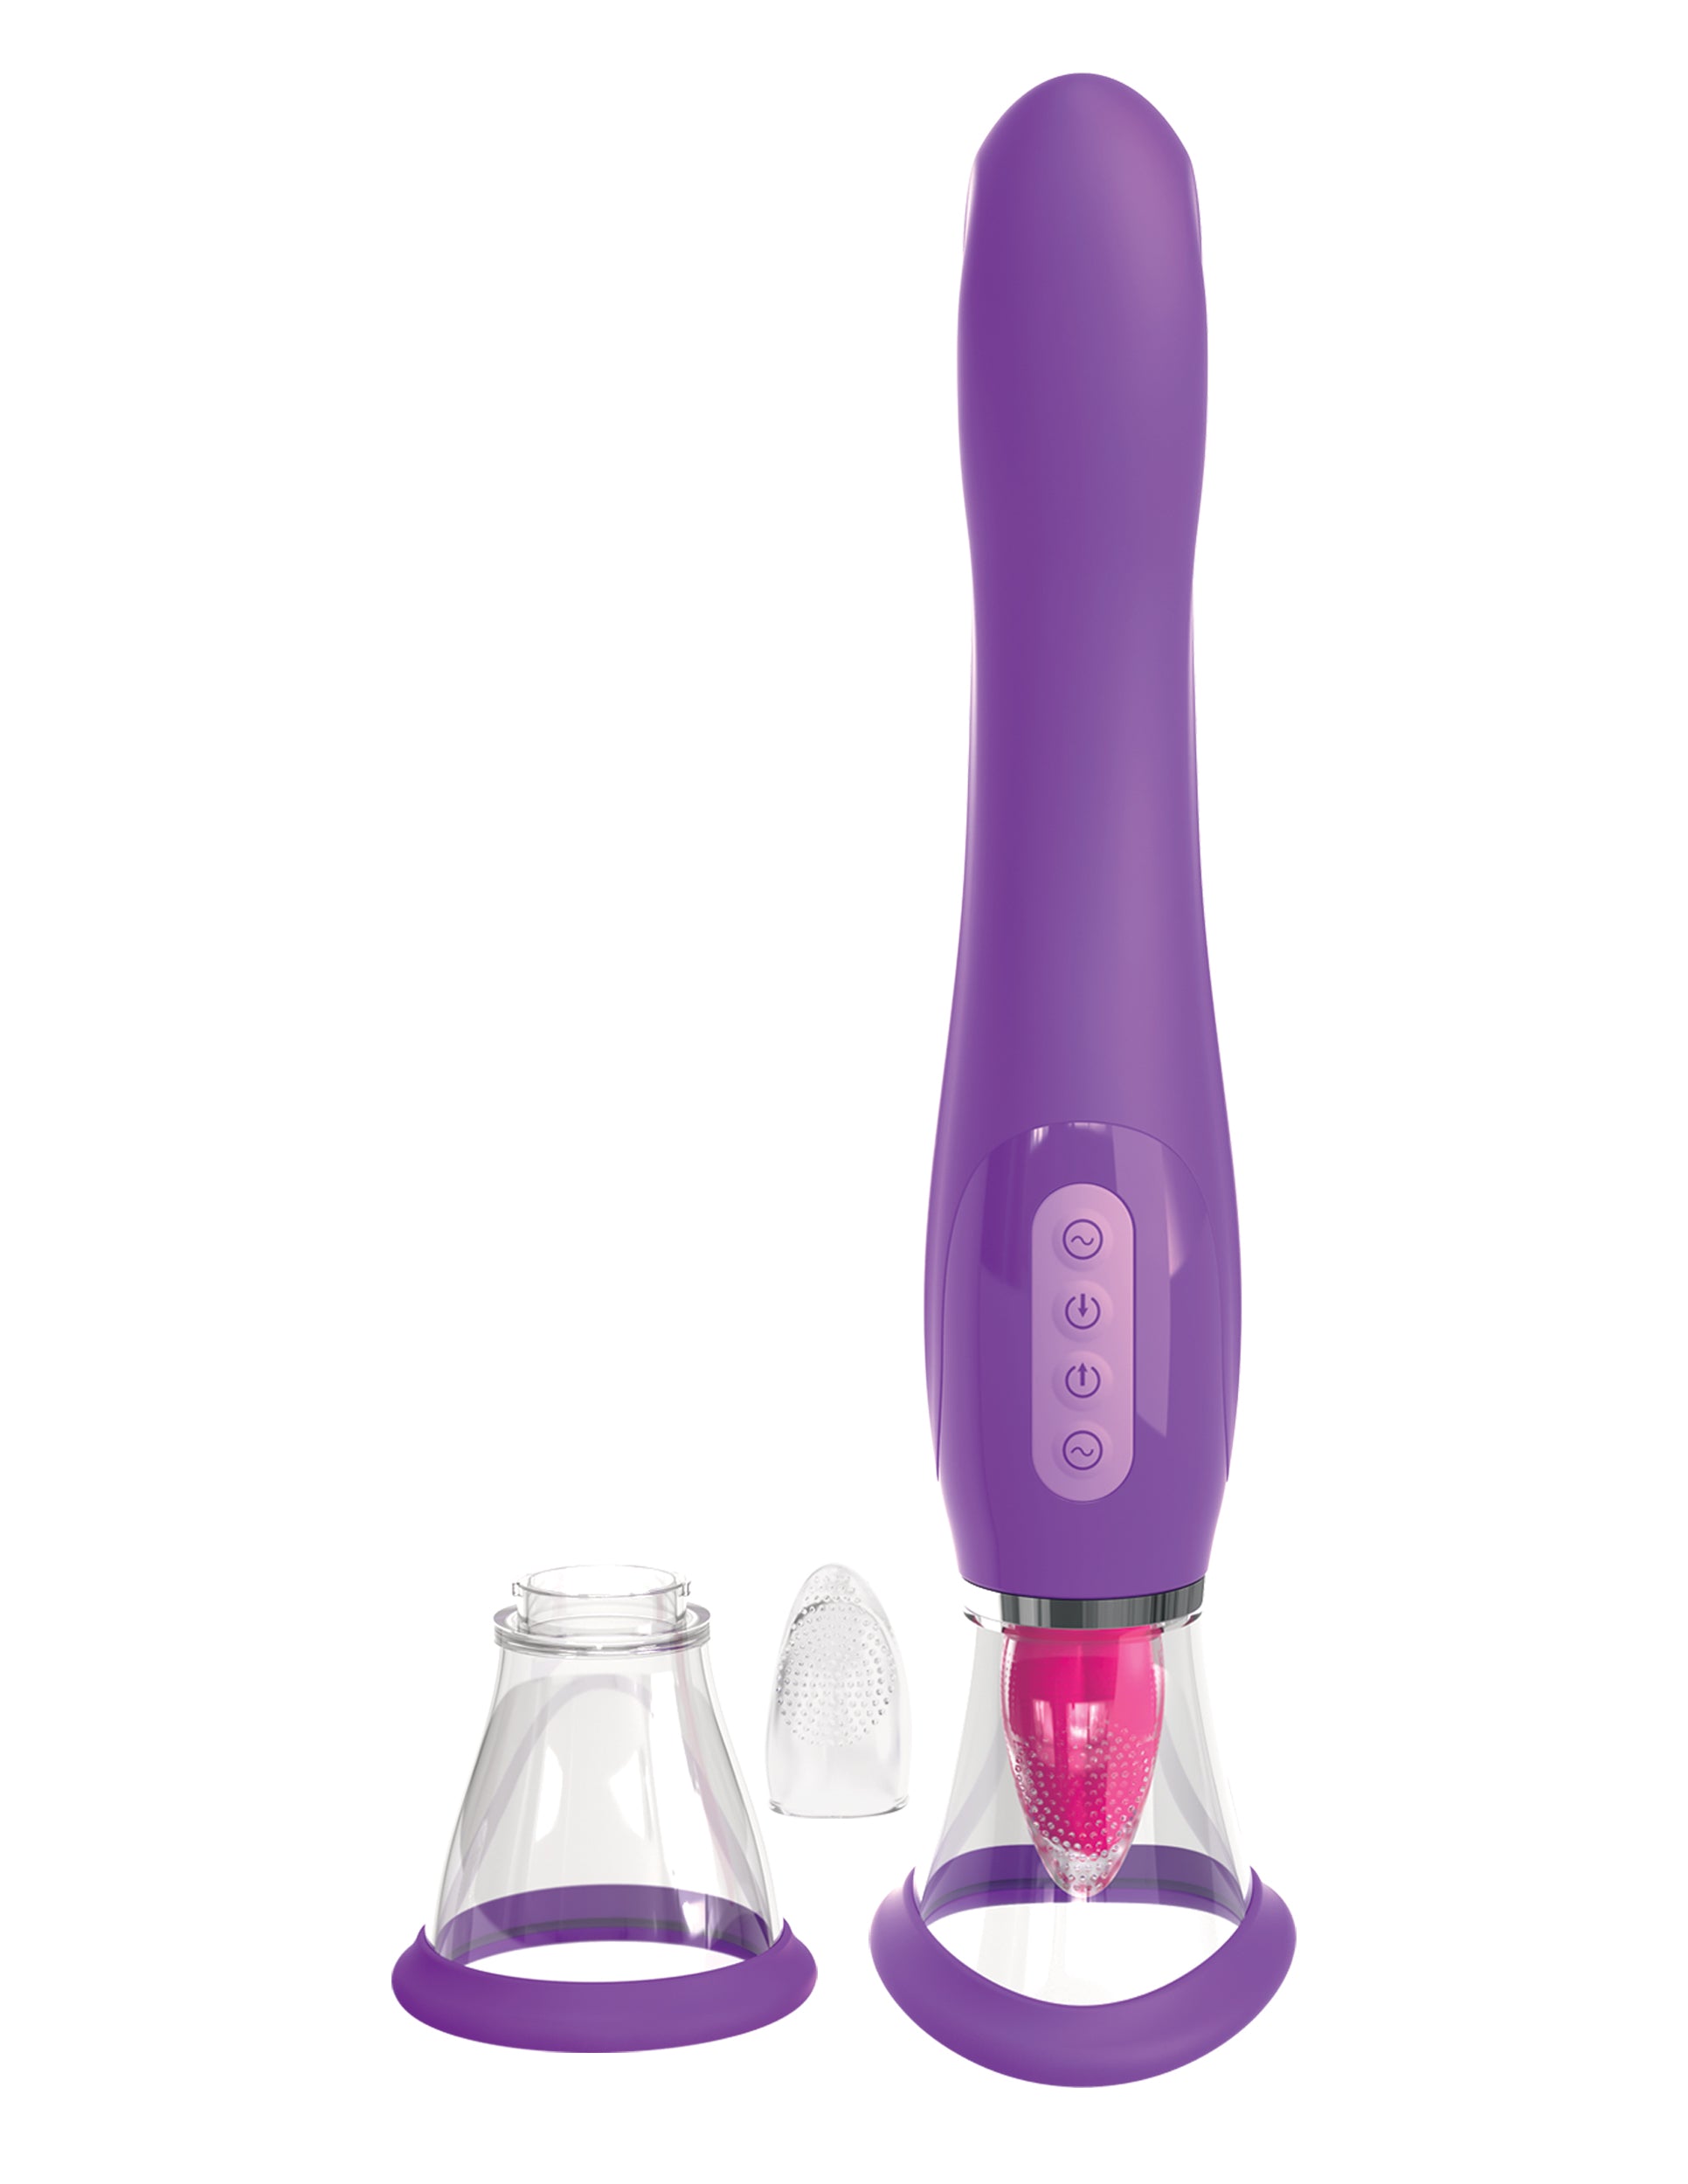 Fantasy For Her Her Ultimate Pleasure Pipedream Products